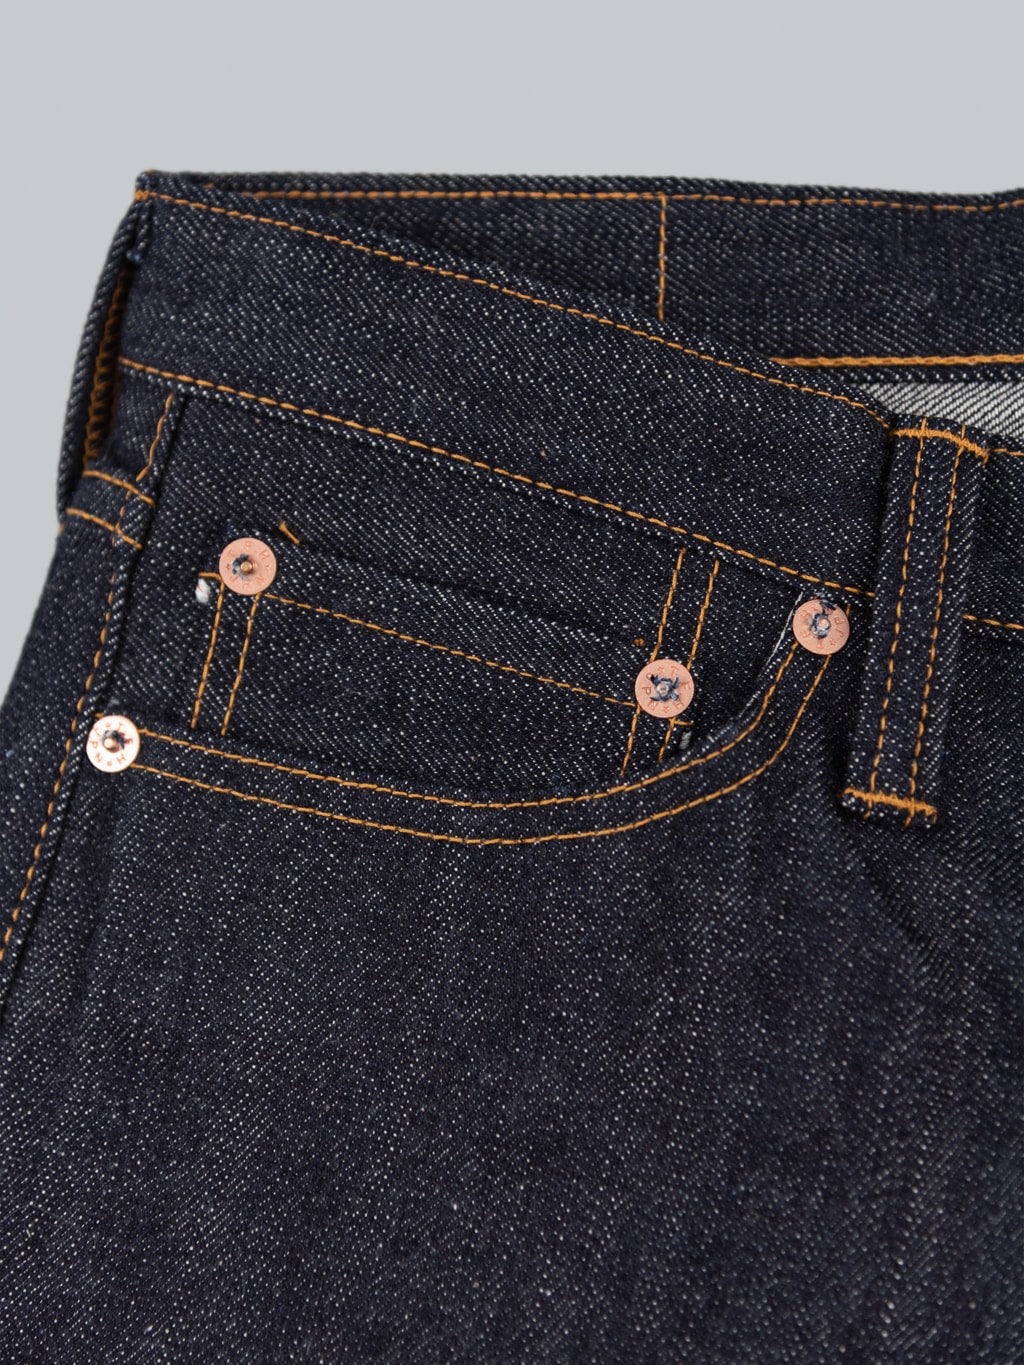 The Flat Head 3009 14.5oz straight tapered Jeans  detais